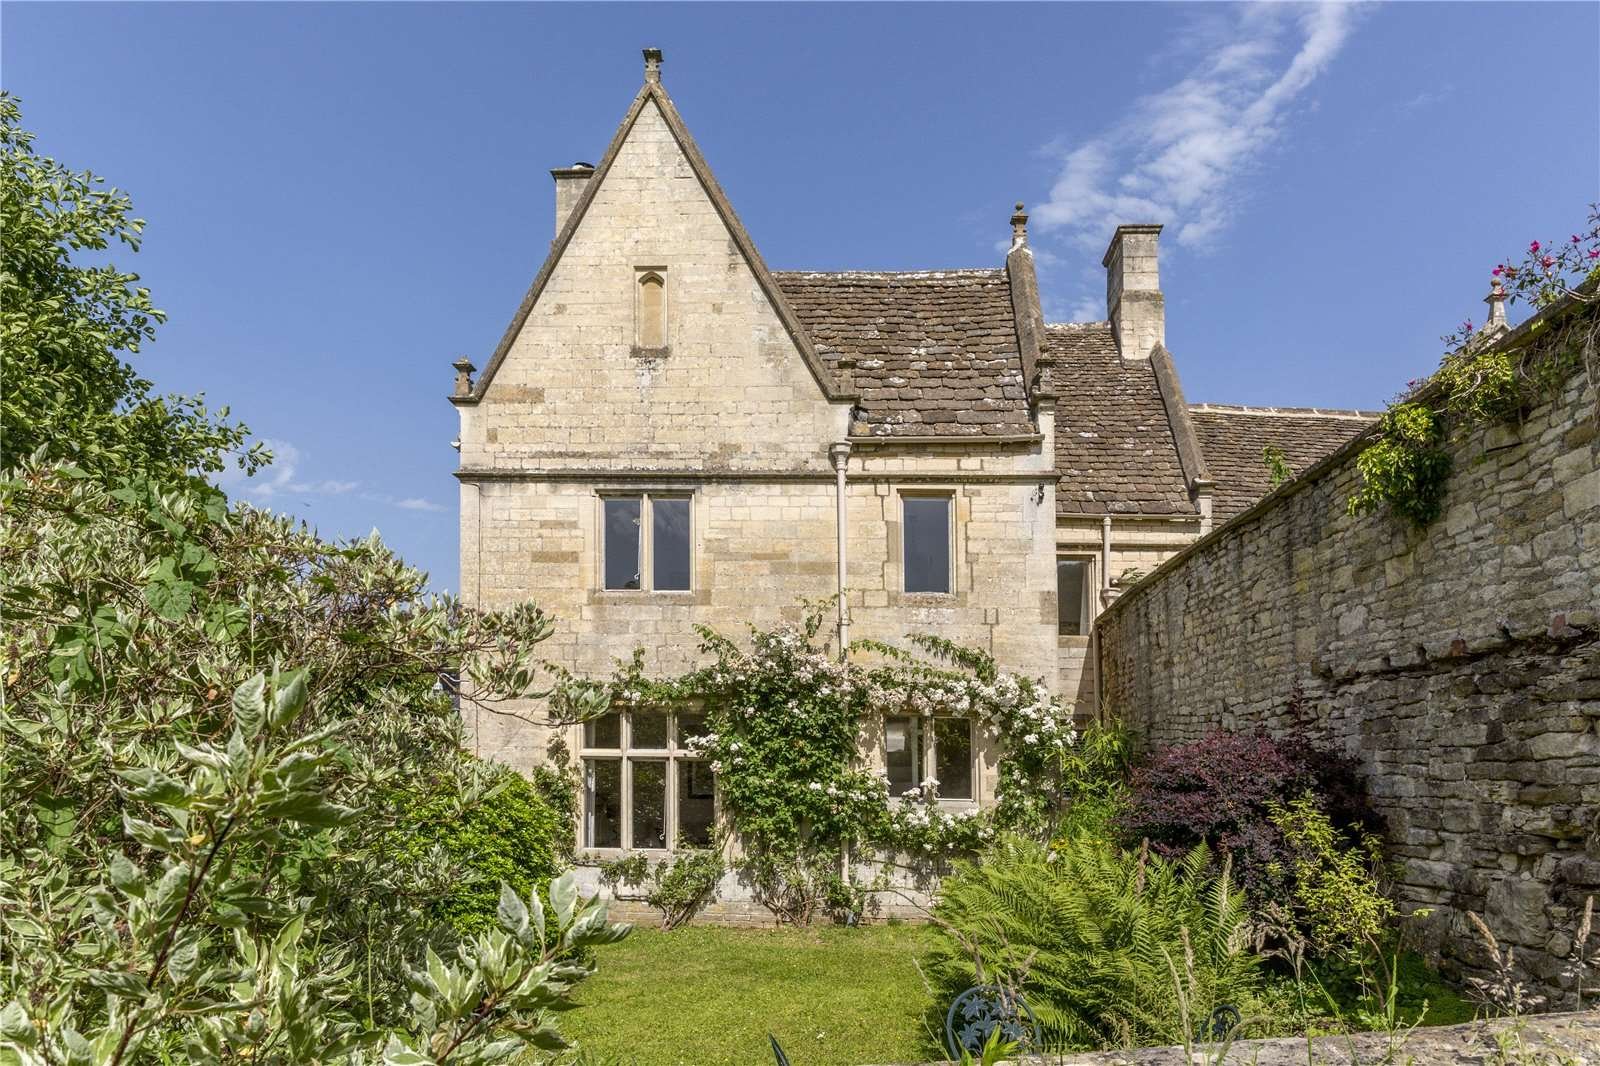 Francis York TCotswolds House Built on the  Site of an Ancient Roman Villa  Savills Bluebook Agency 26.jpg